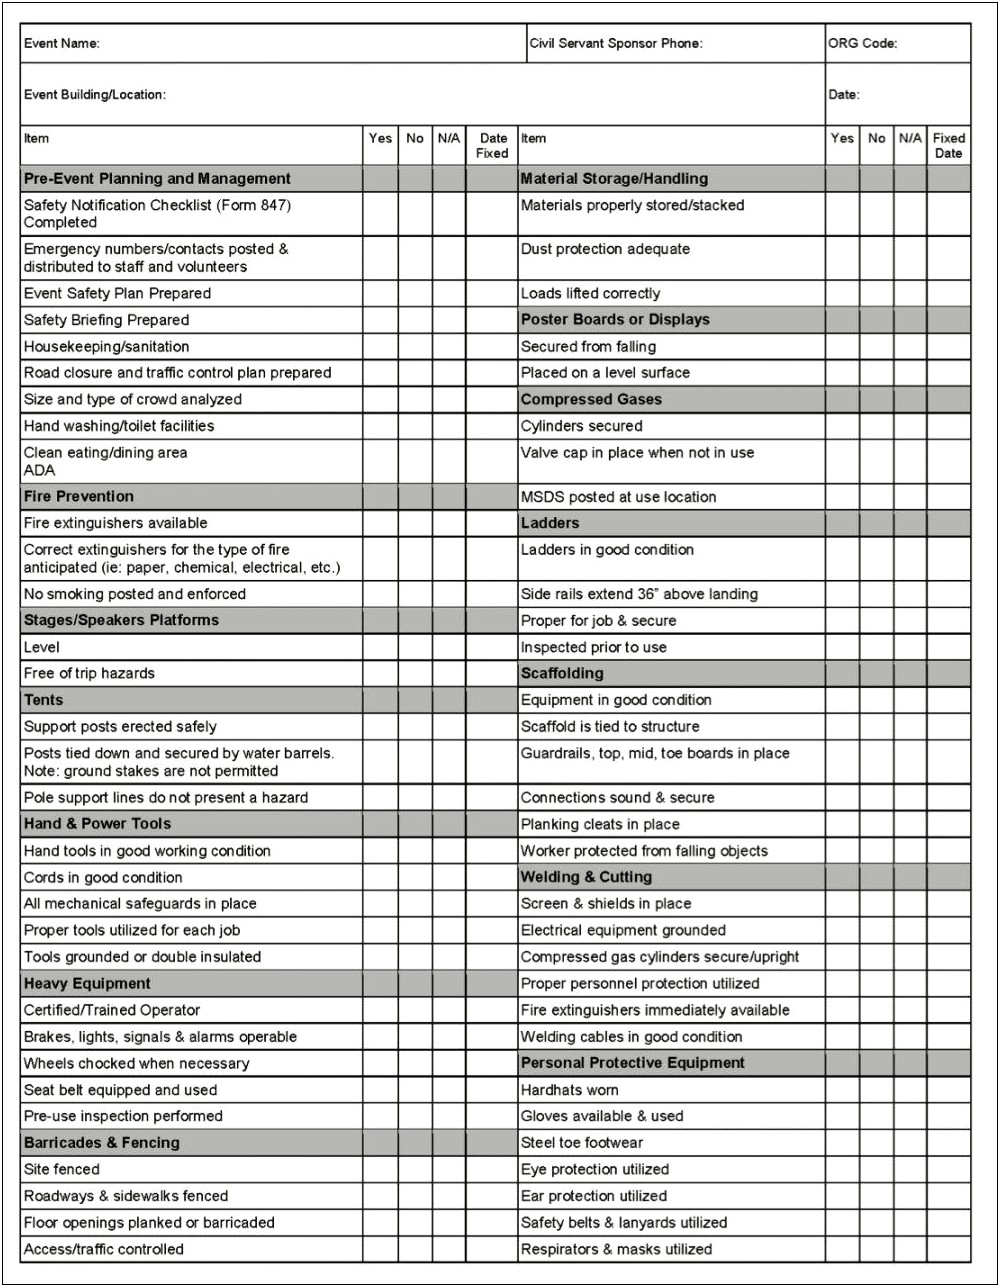 Free Daily Equipment Inspection Checklist Template